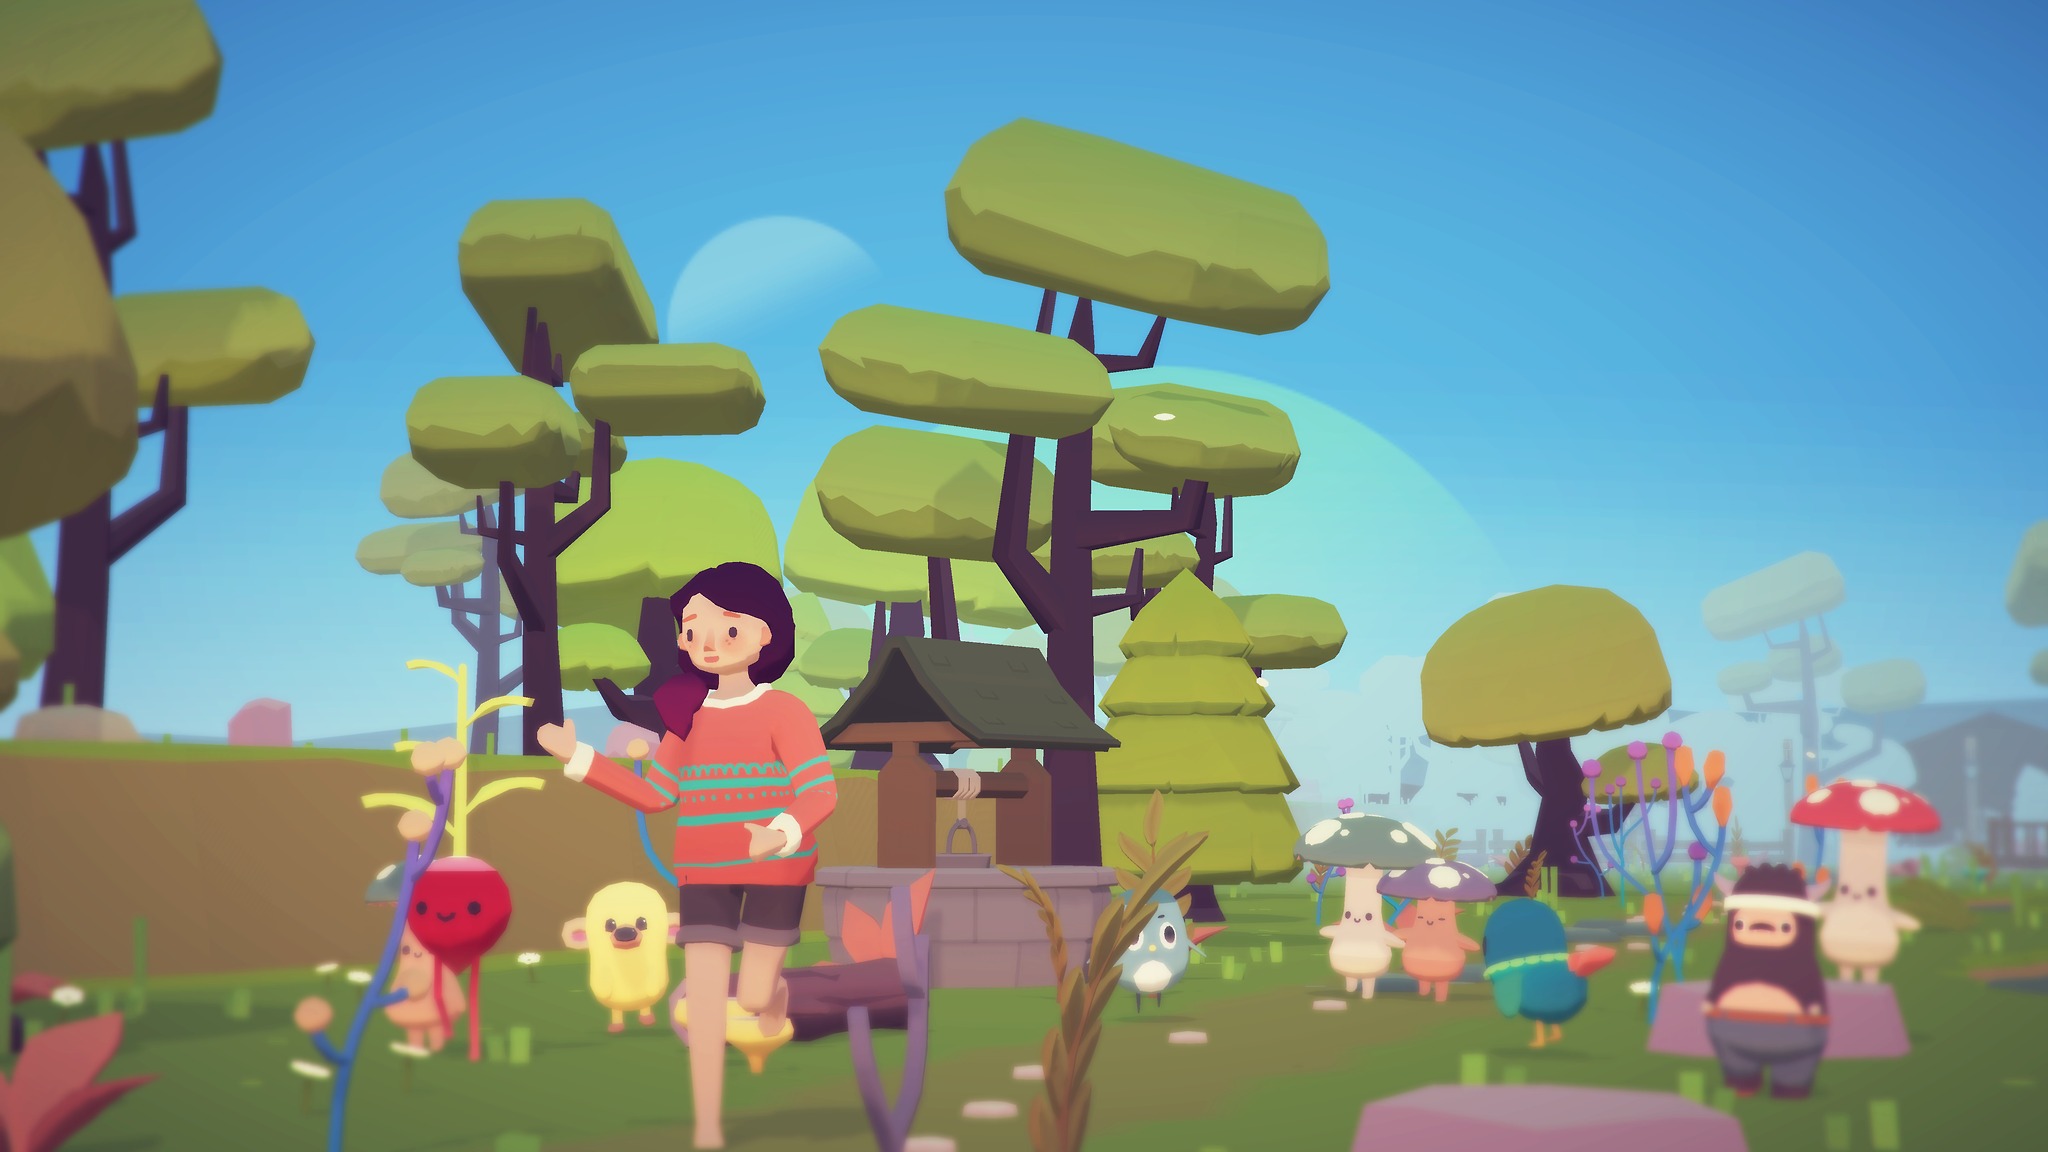 Ooblets for android download